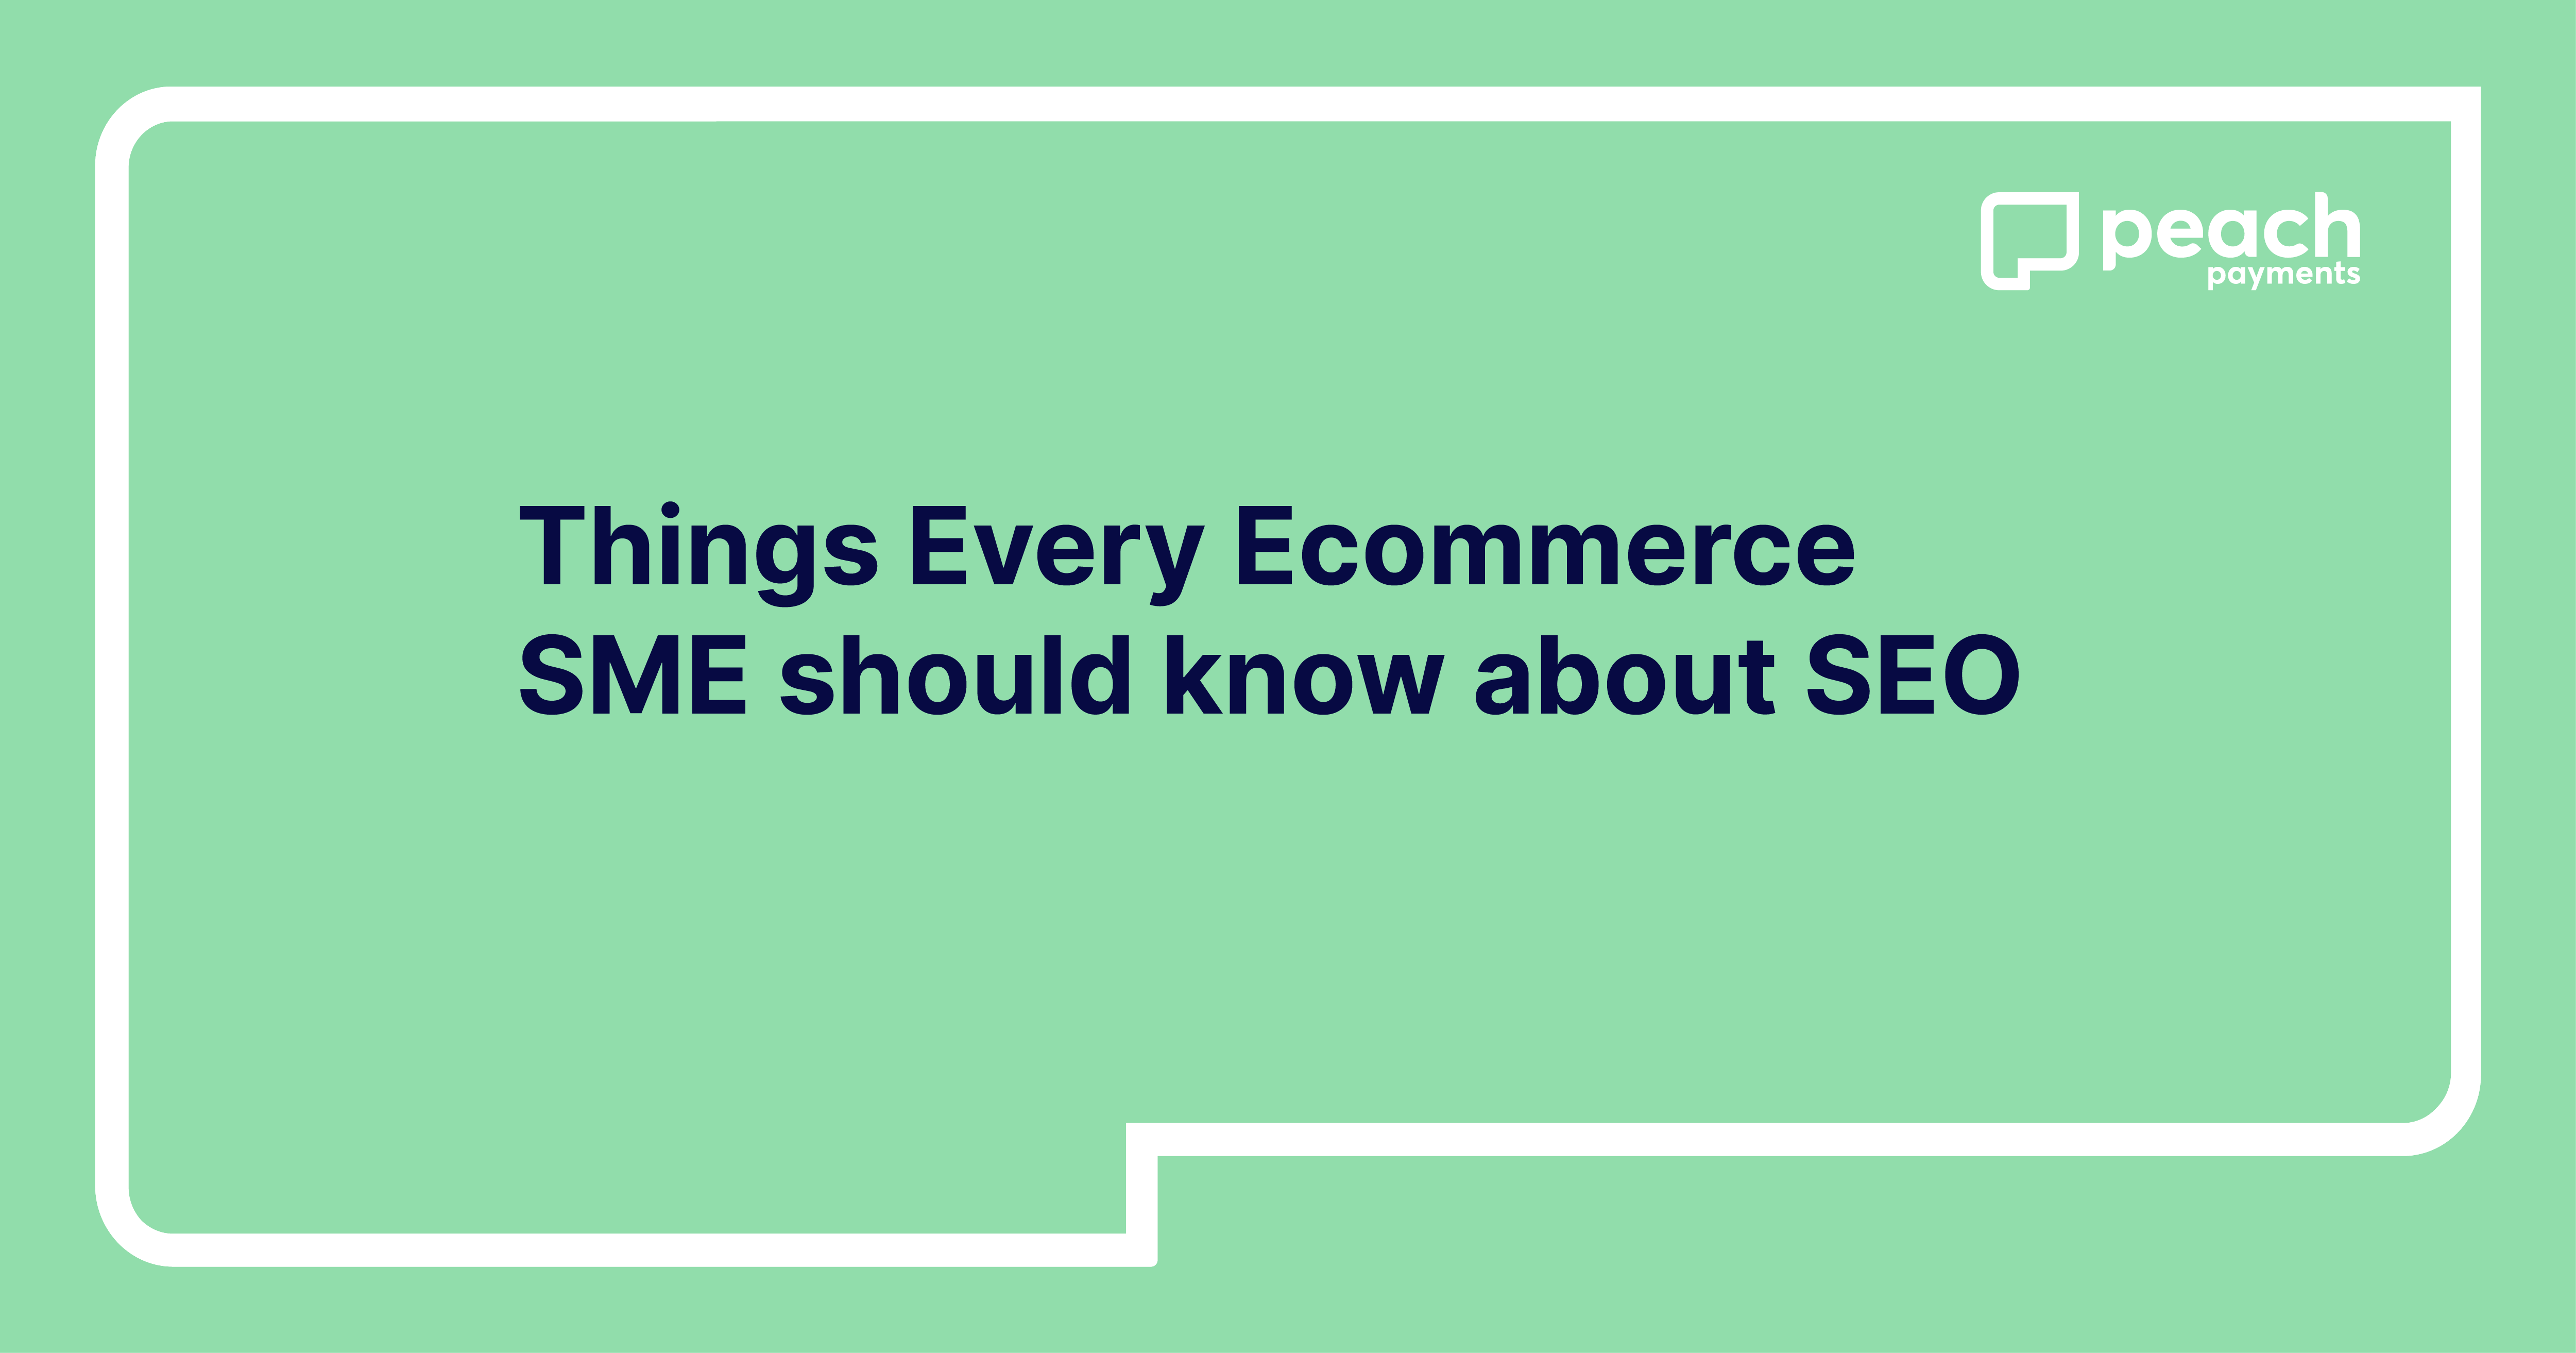 Things every ecommerce SME should know about SEO